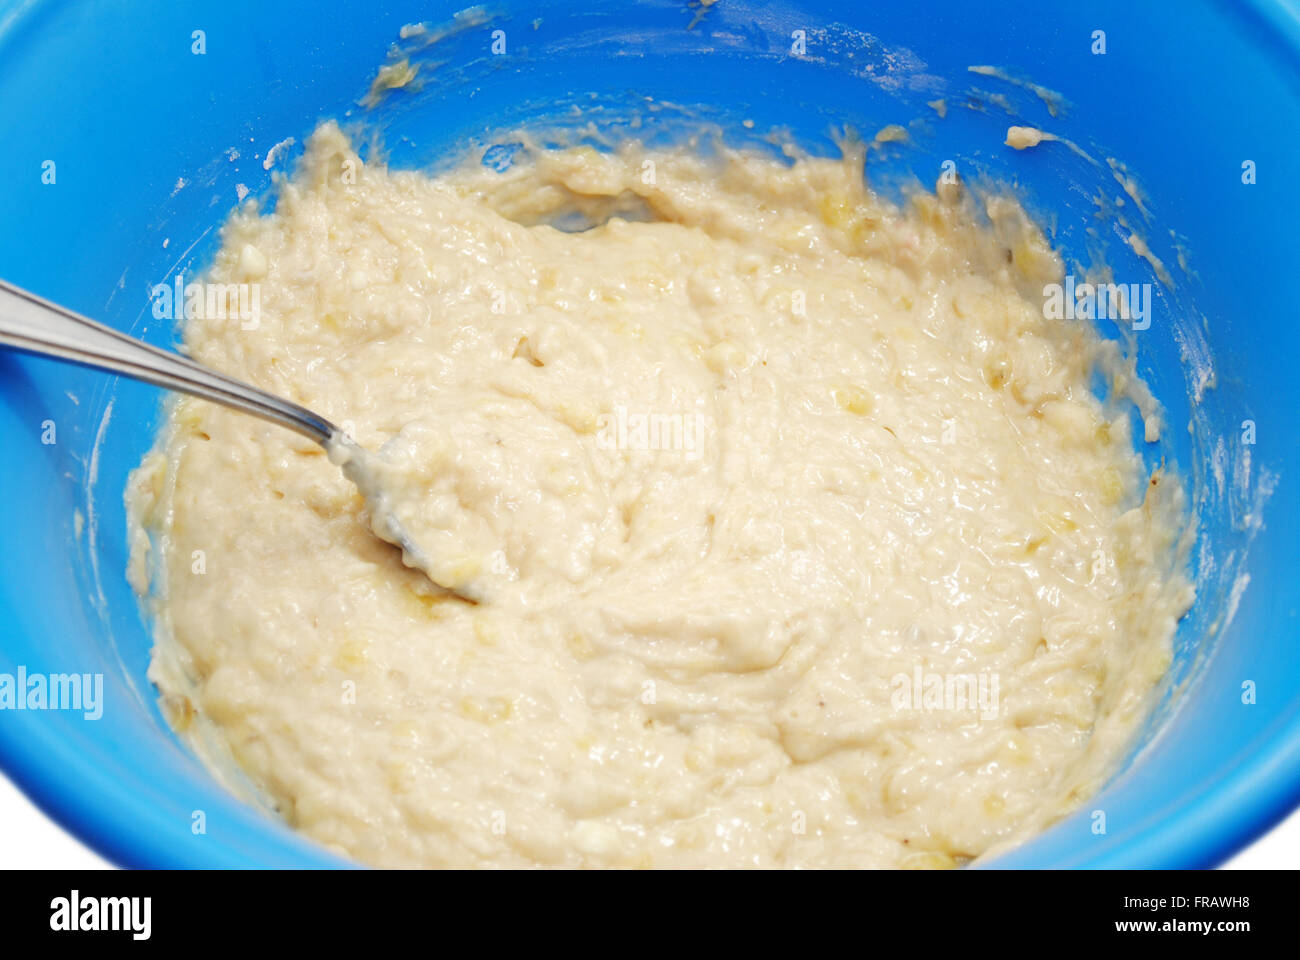 Banana Flavored Muffin or Bread Mix Stock Photo